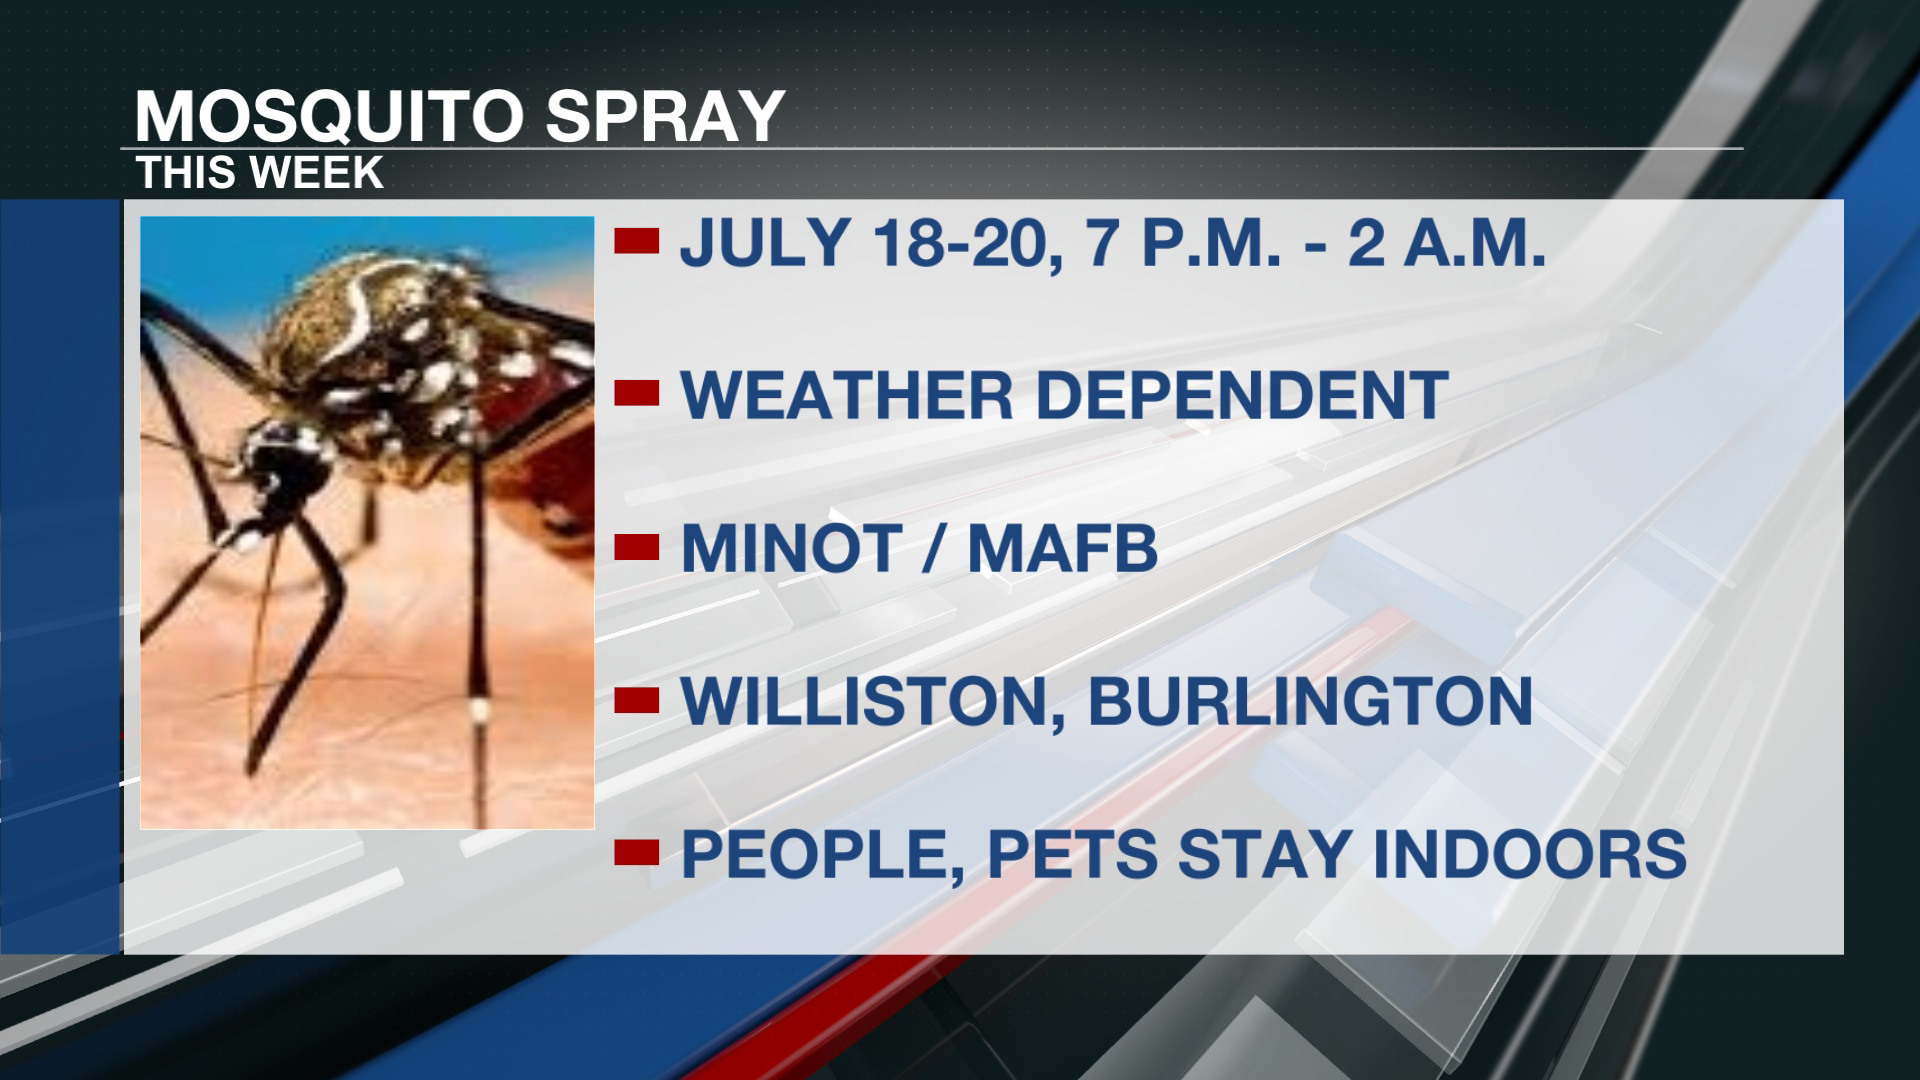 Mosquito spray this week ahead of ND State Fair